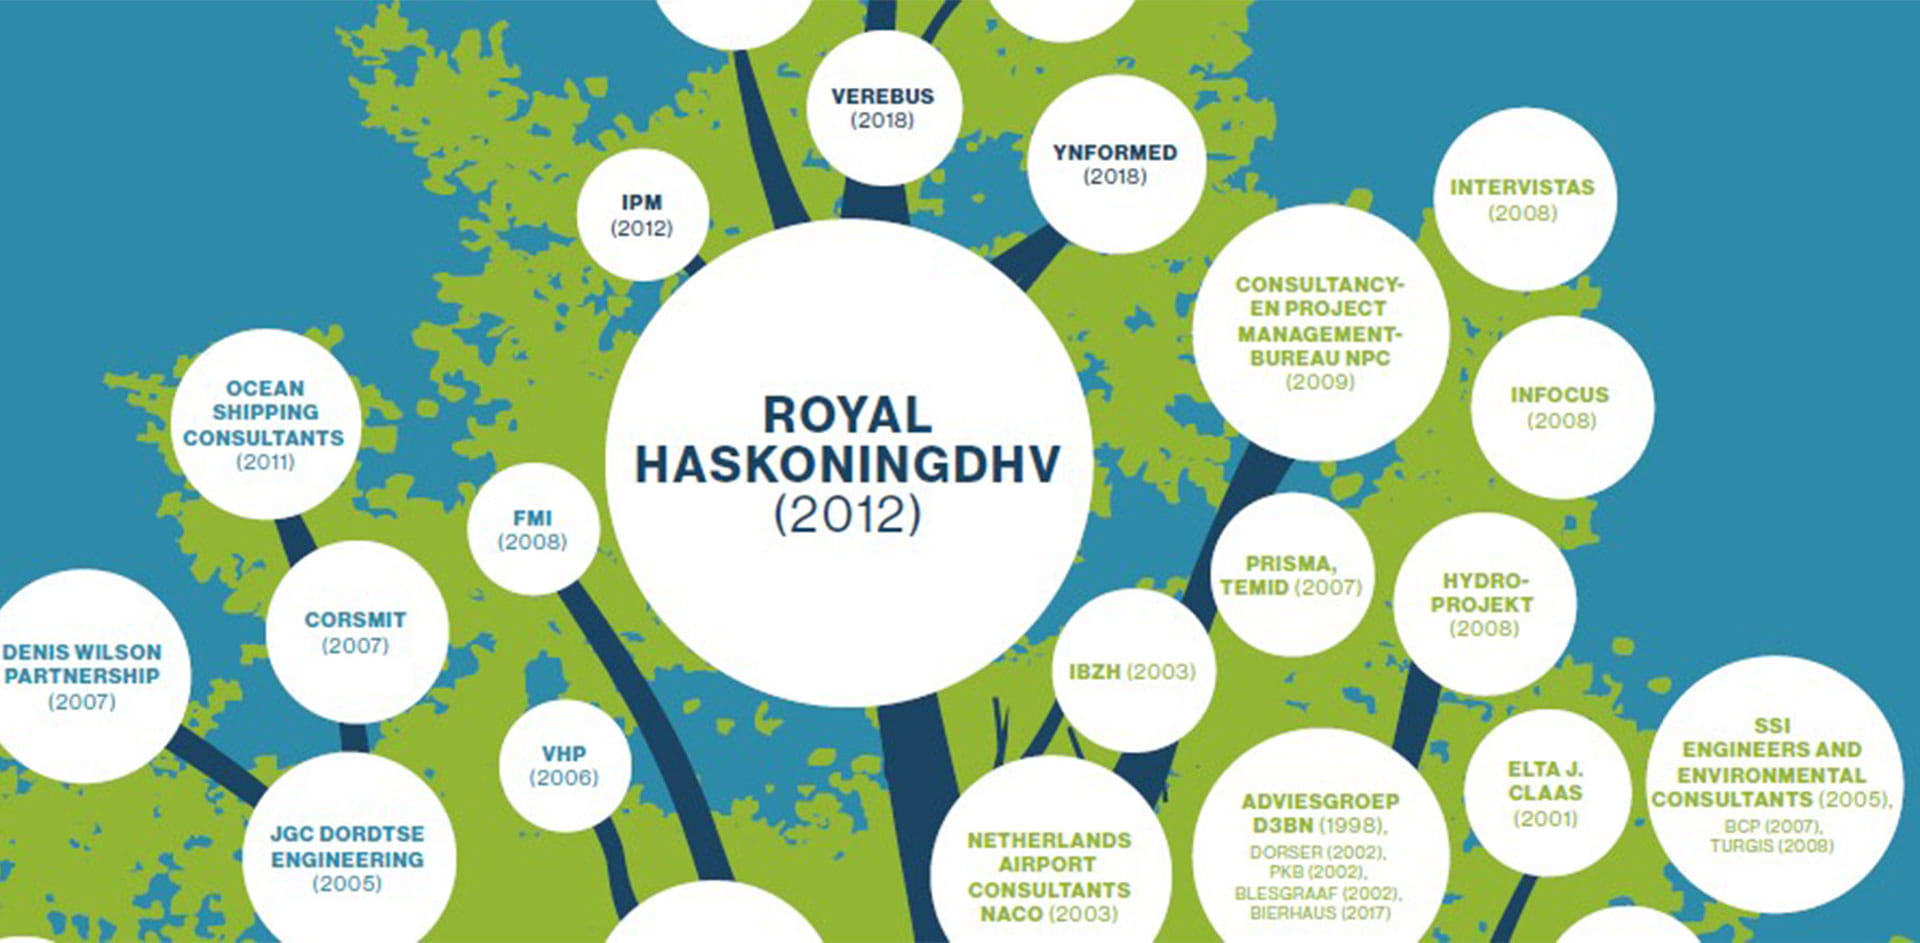 Infographic describing the history of Royal HaskoningDHV